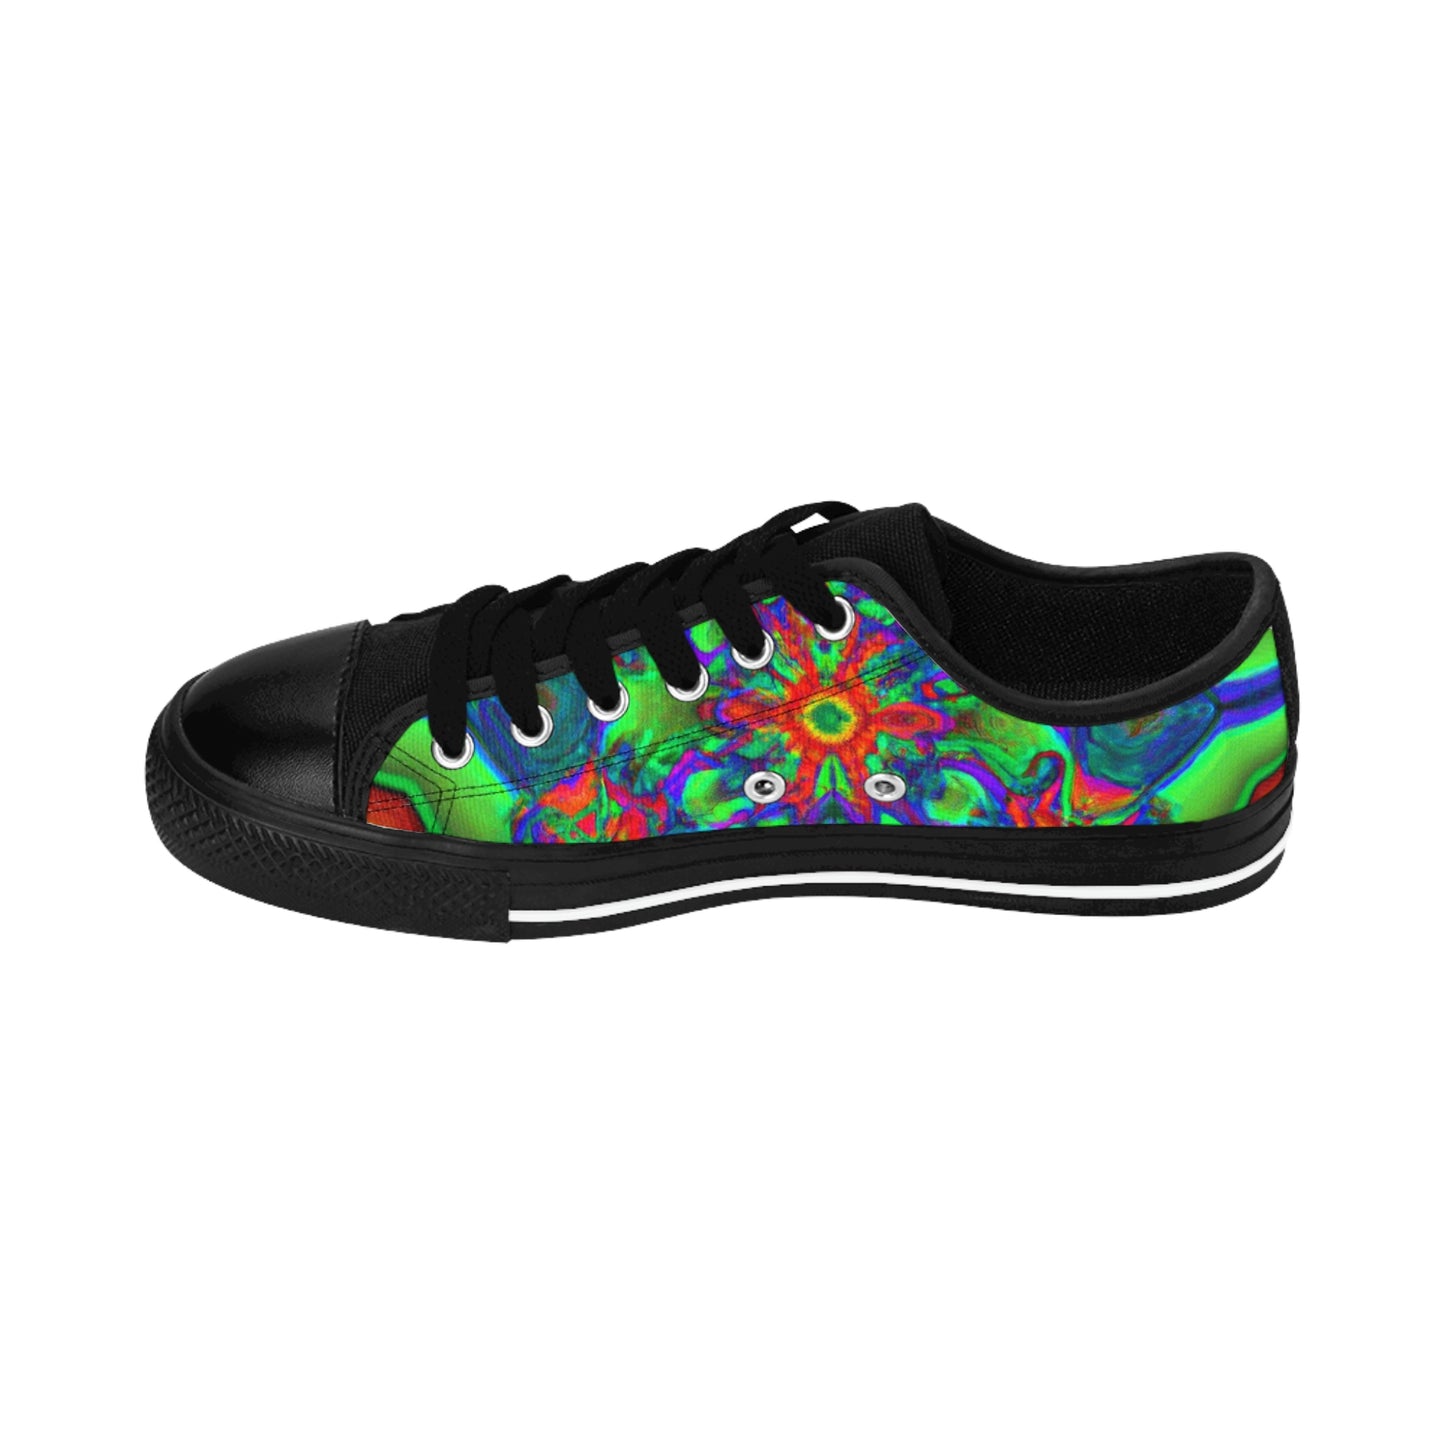 Gielahh of Ghent - Psychedelic Low Top